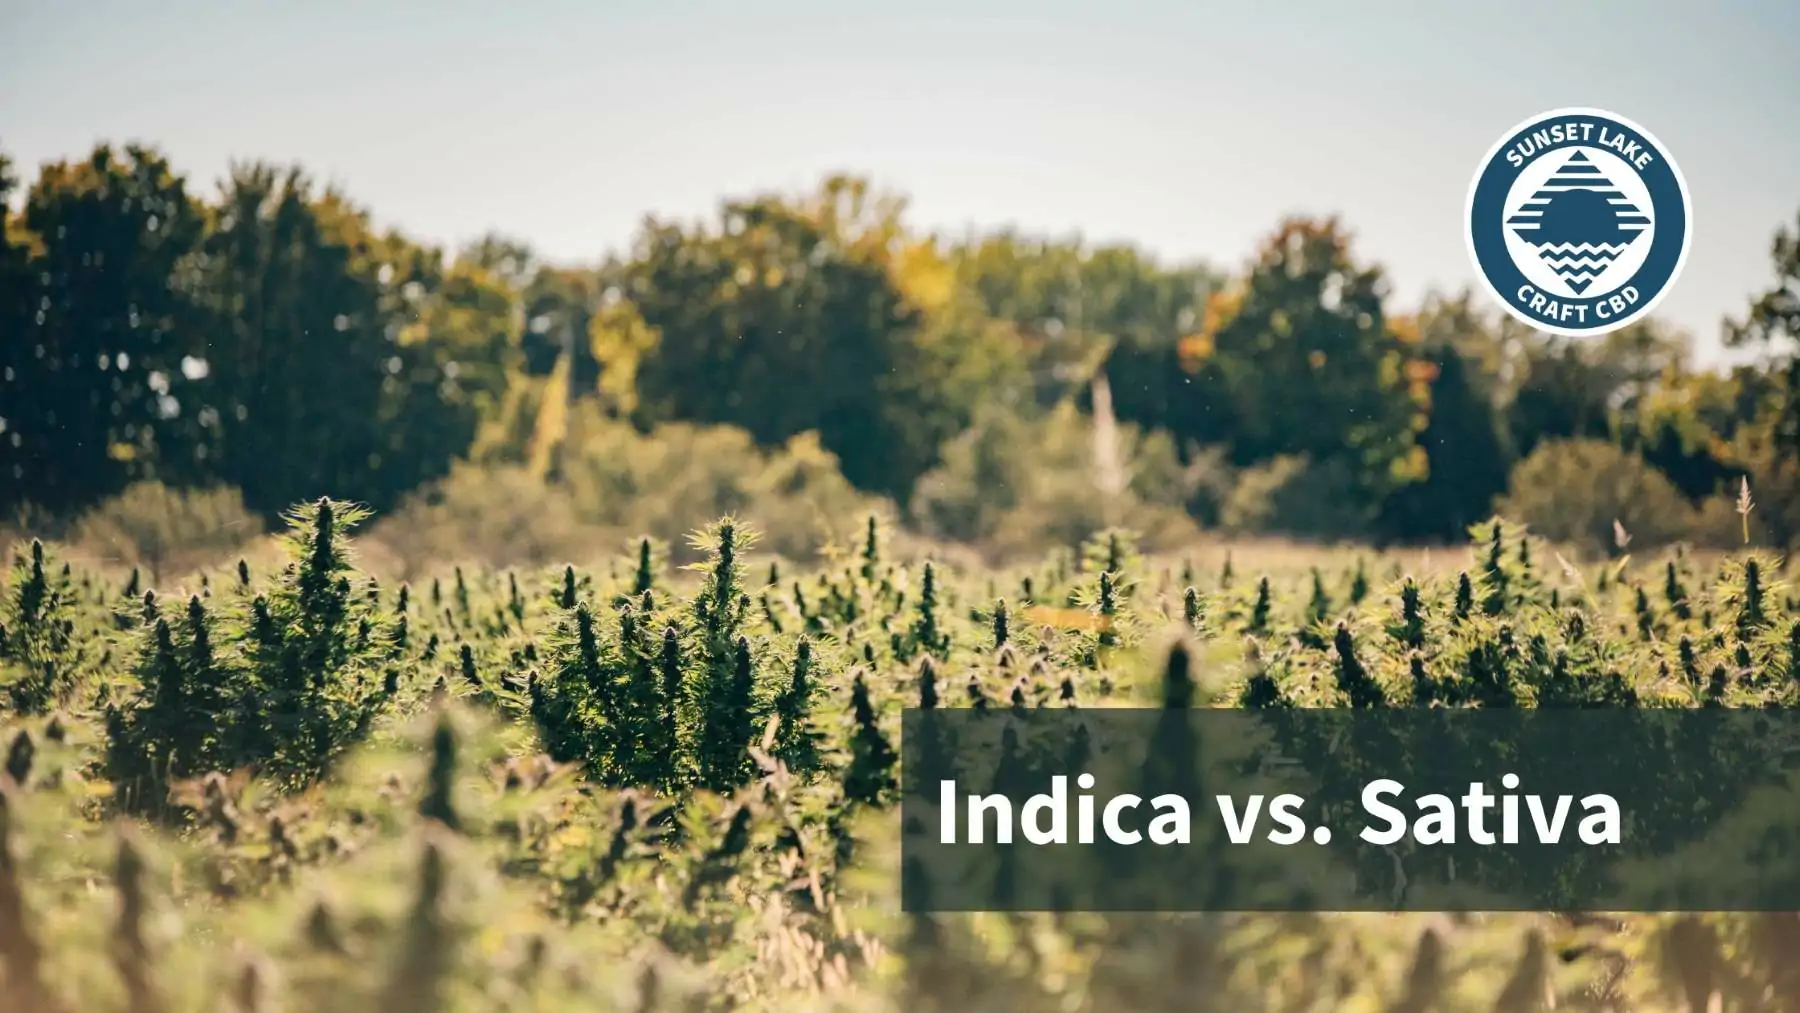 Indica vs. Sativa: Are They Really That Different?